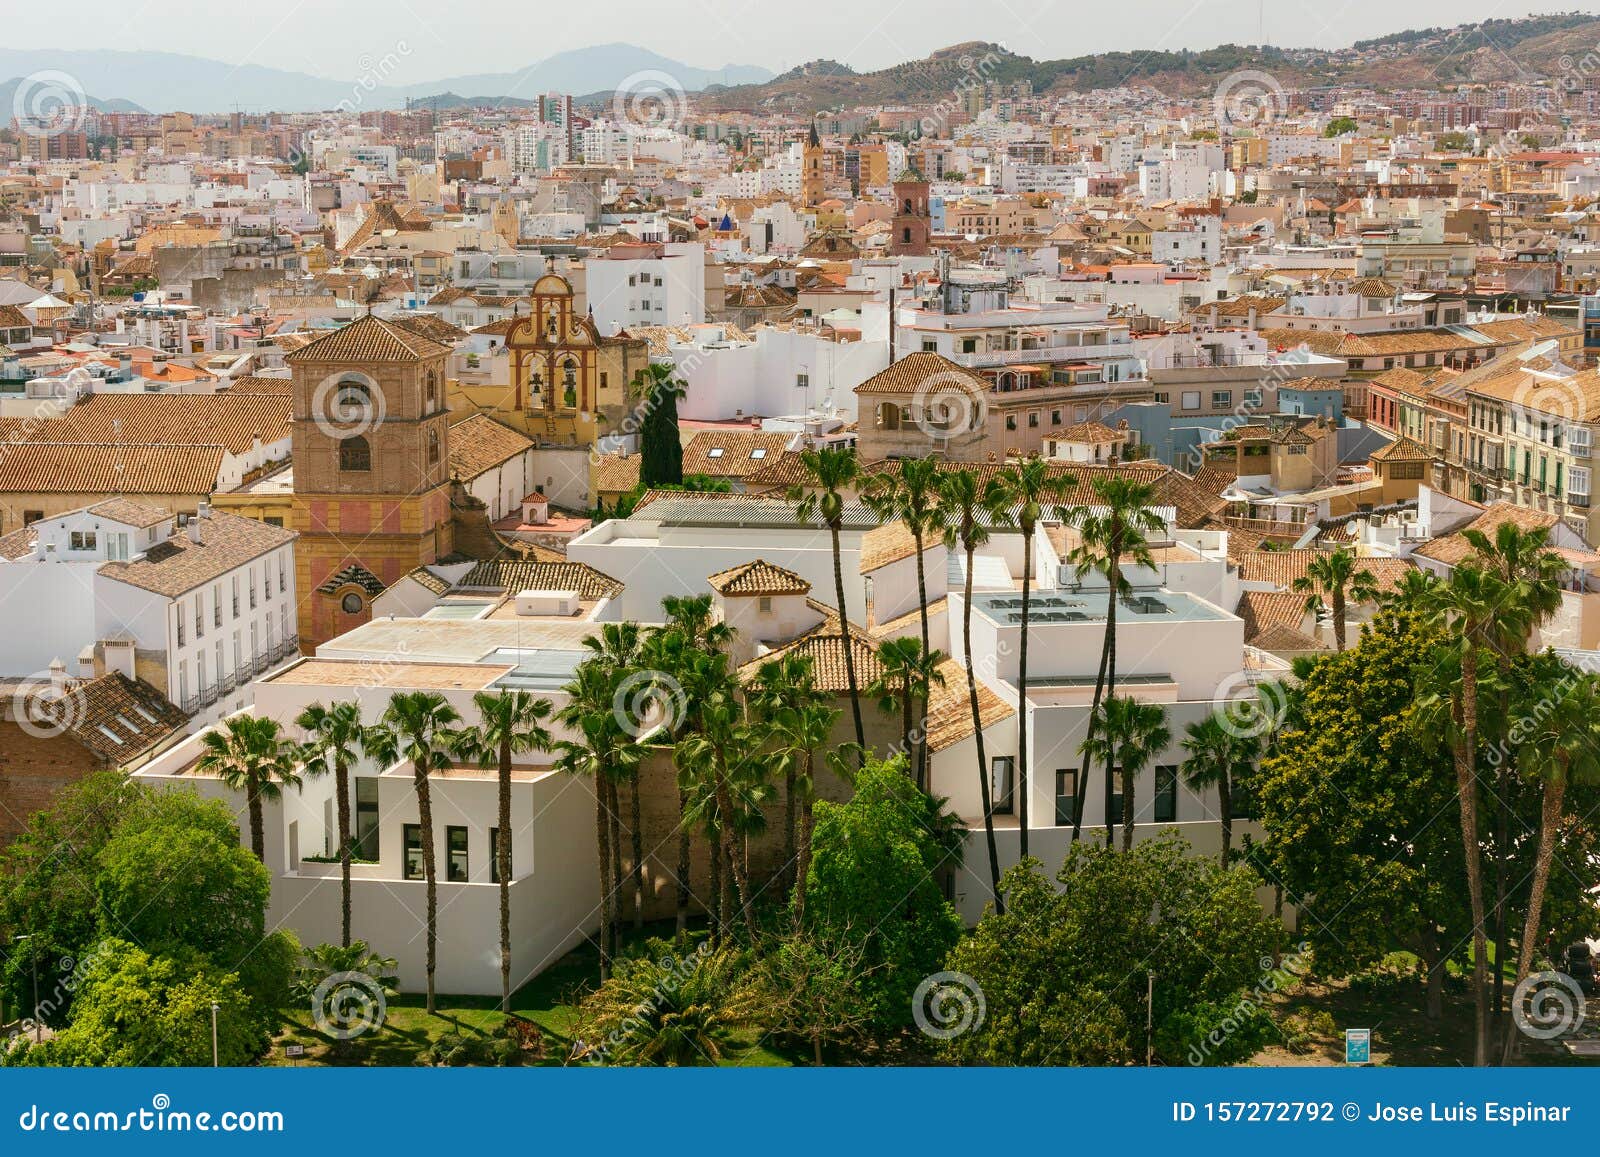 panoramic view of the picasso museum with the city of malaga in the background